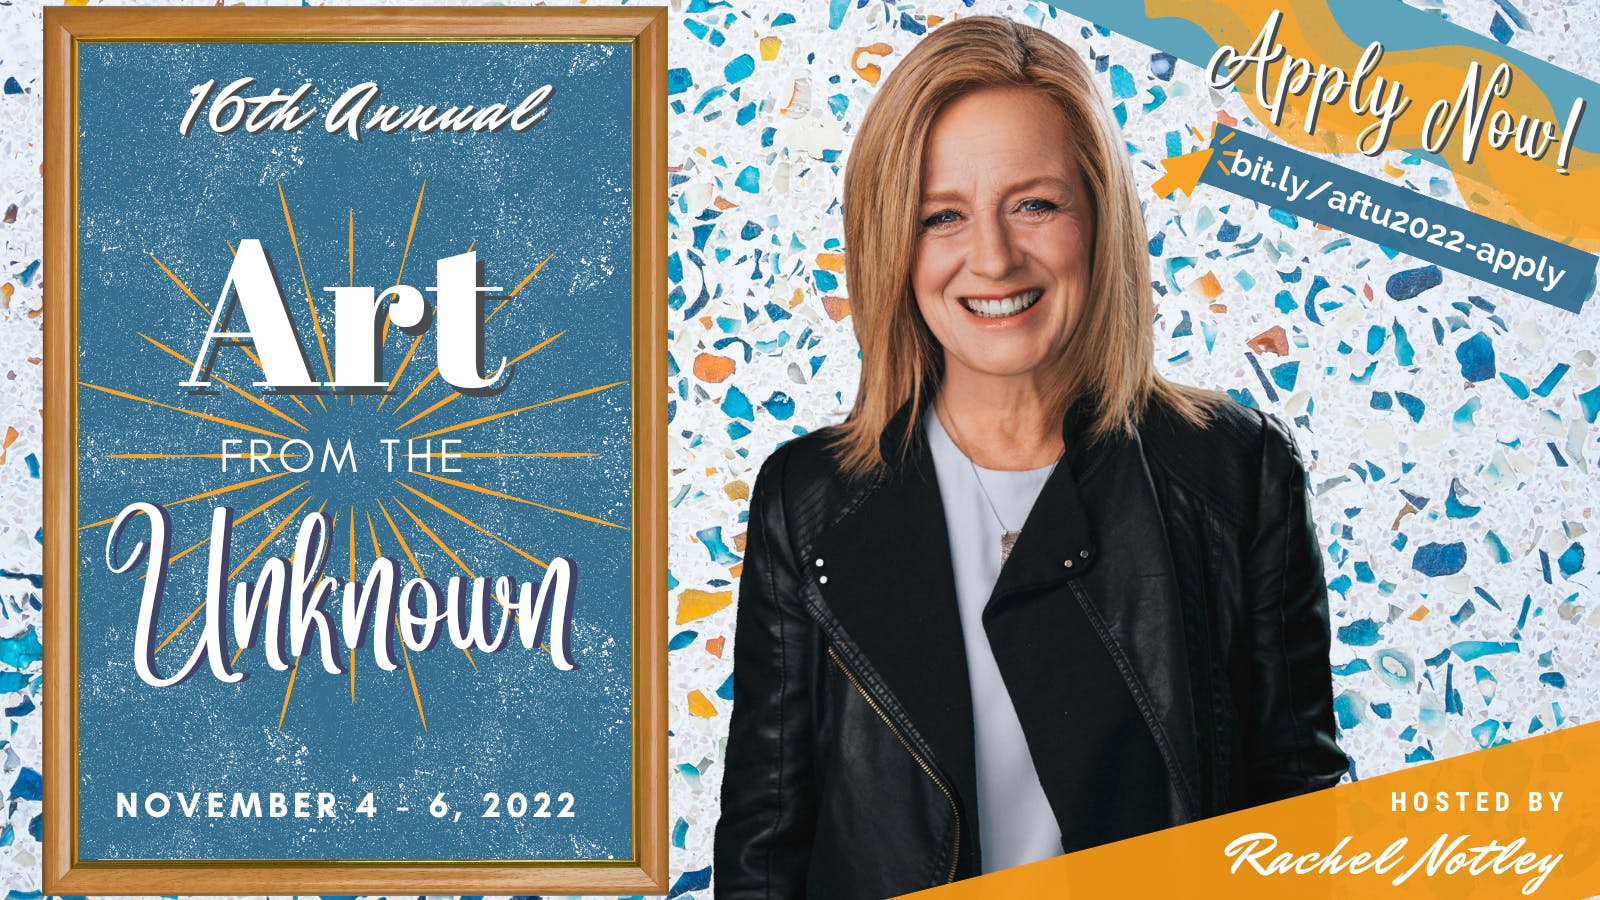 Promotional Image of Art from the Unknown 2022 hosted by Rachel Notley. November 4 - 6, 2022